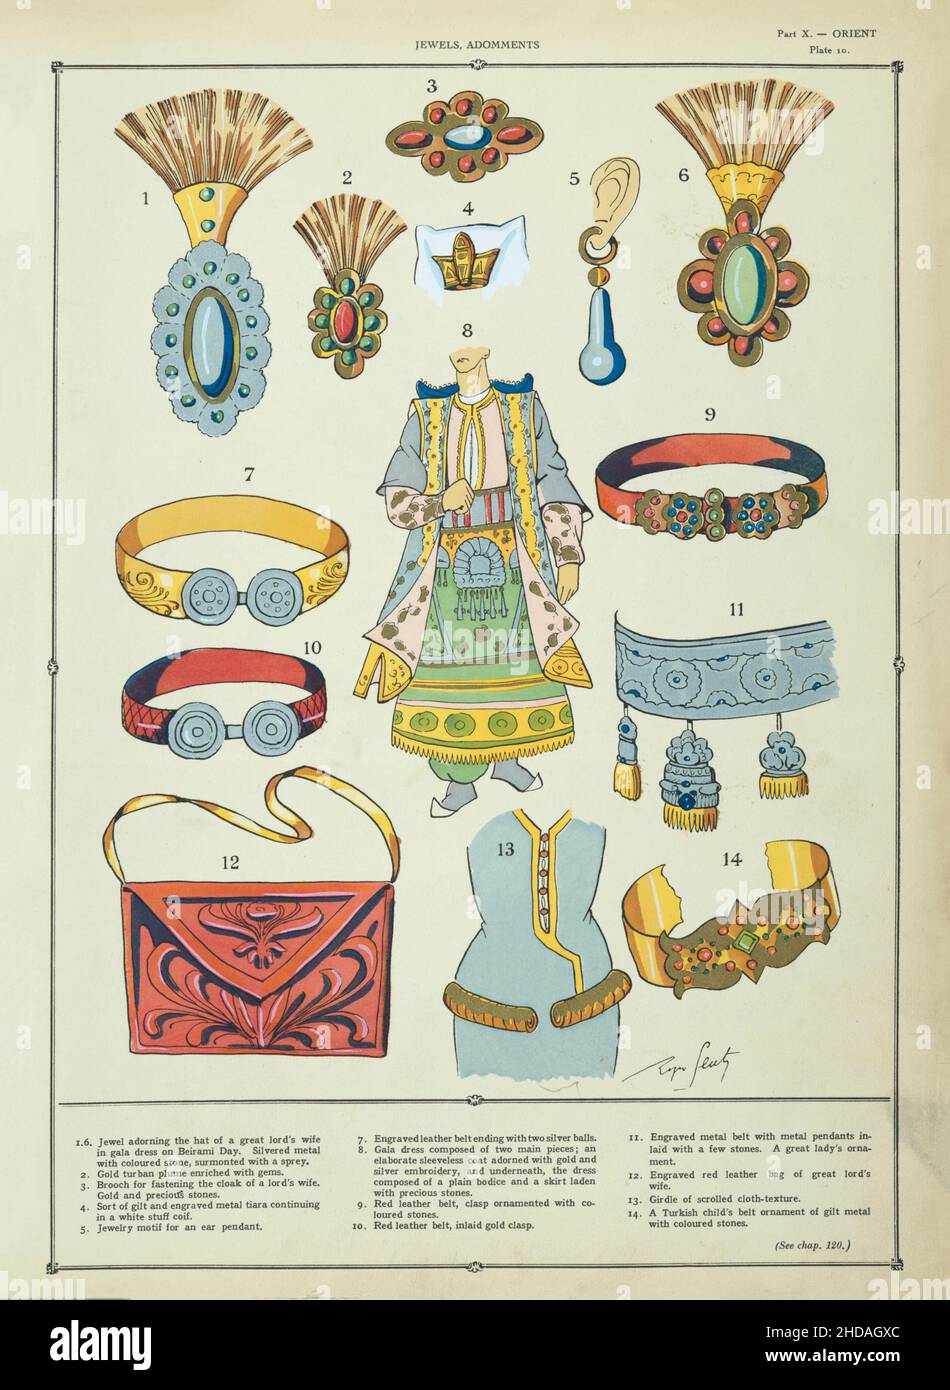 Vintage illustration of Turkish traditional jewels and adomments. 1926 1. Jewel adorning the hat of a great lord's wife in gala dress on Beirami Day. Stock Photo